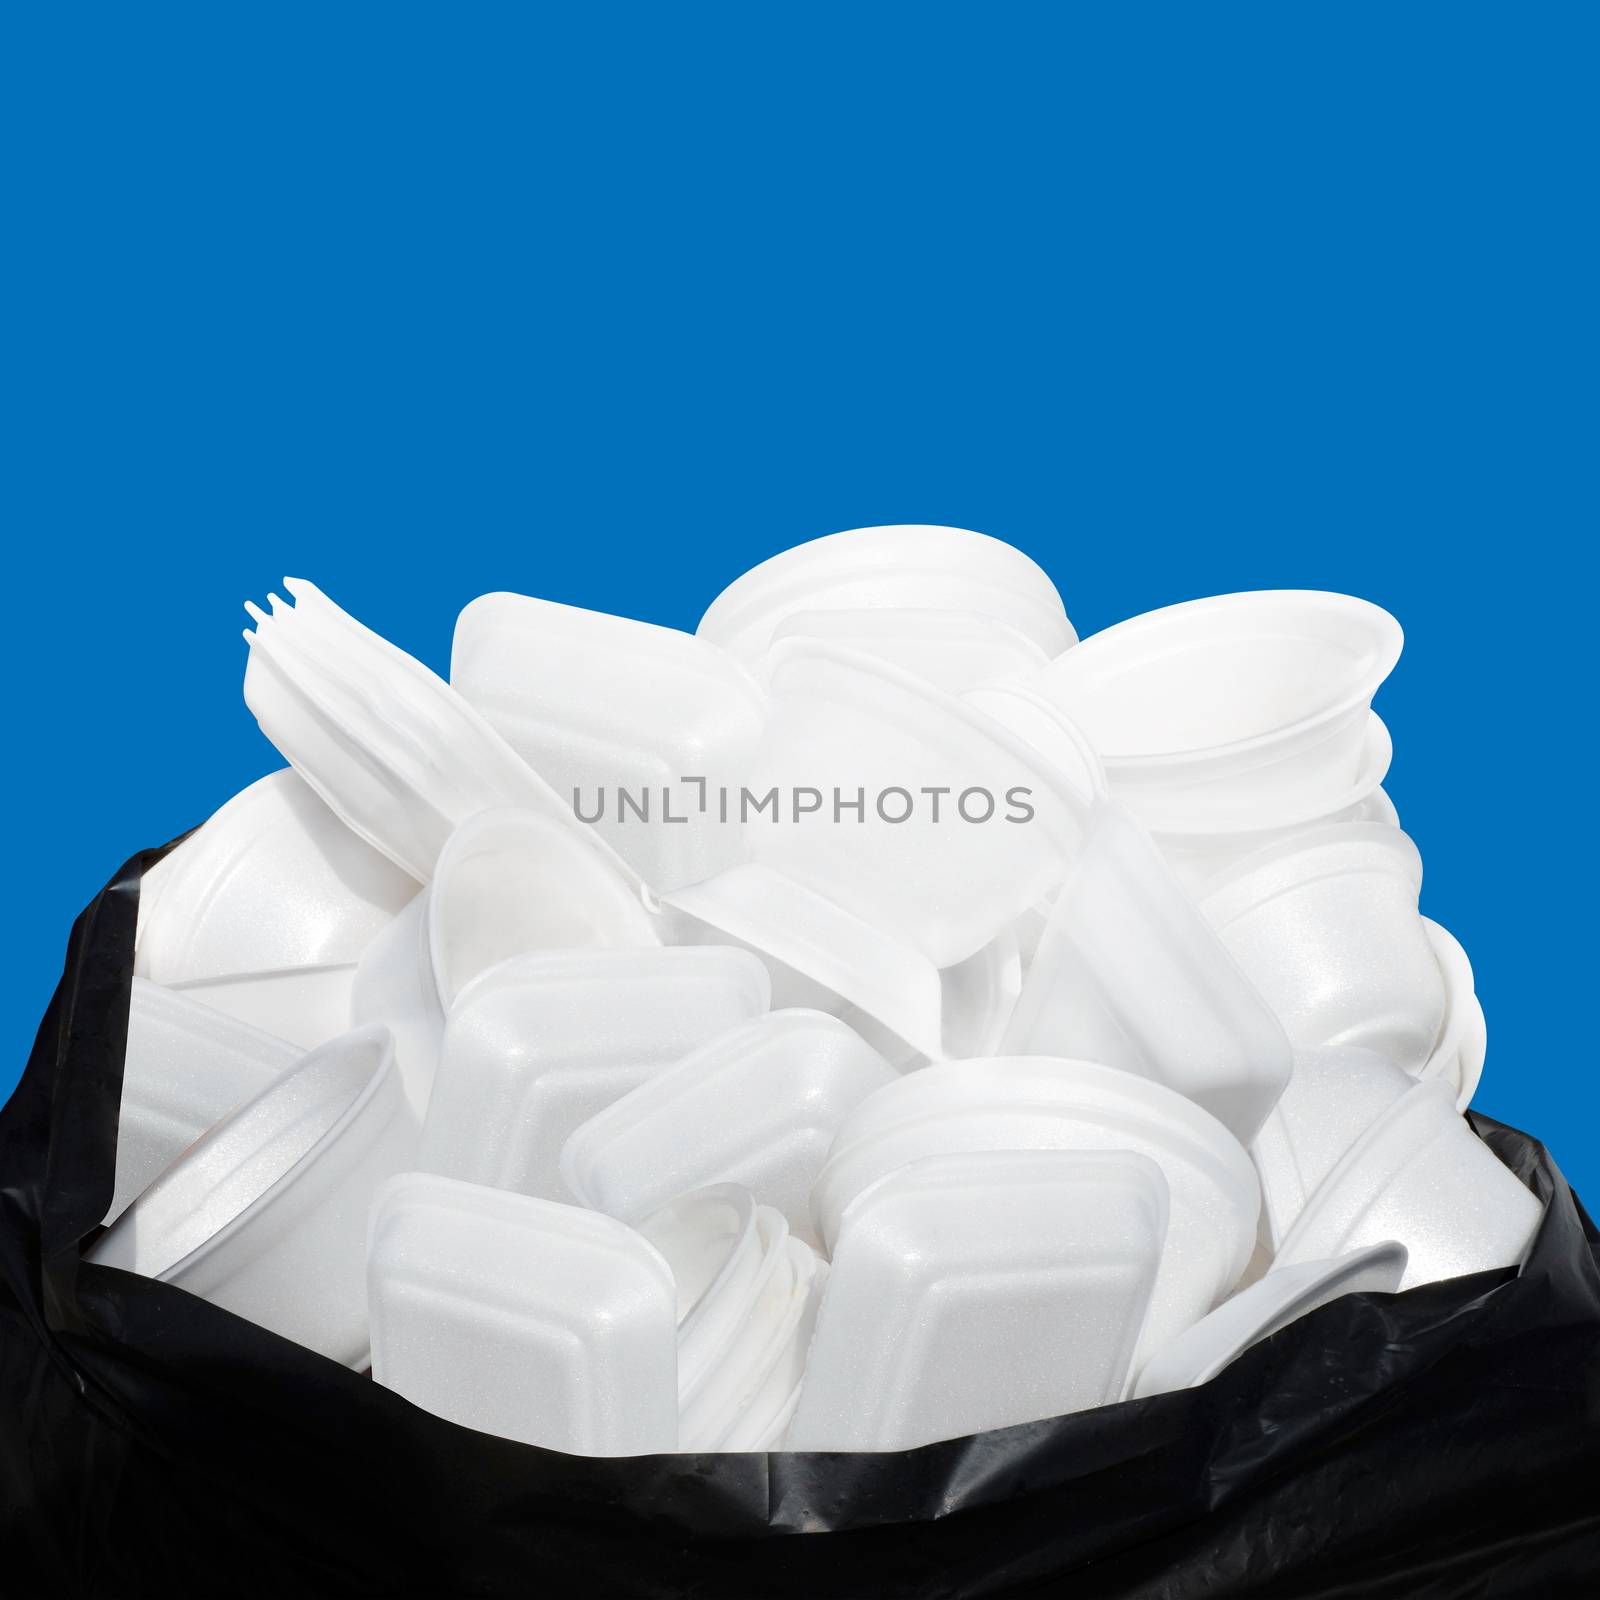 Waste Garbage foam food tray white many pile on the plastic black bag dirty isolated on blue background, Bin, Trash, Recycle, foam trays garbage isolated on blue background